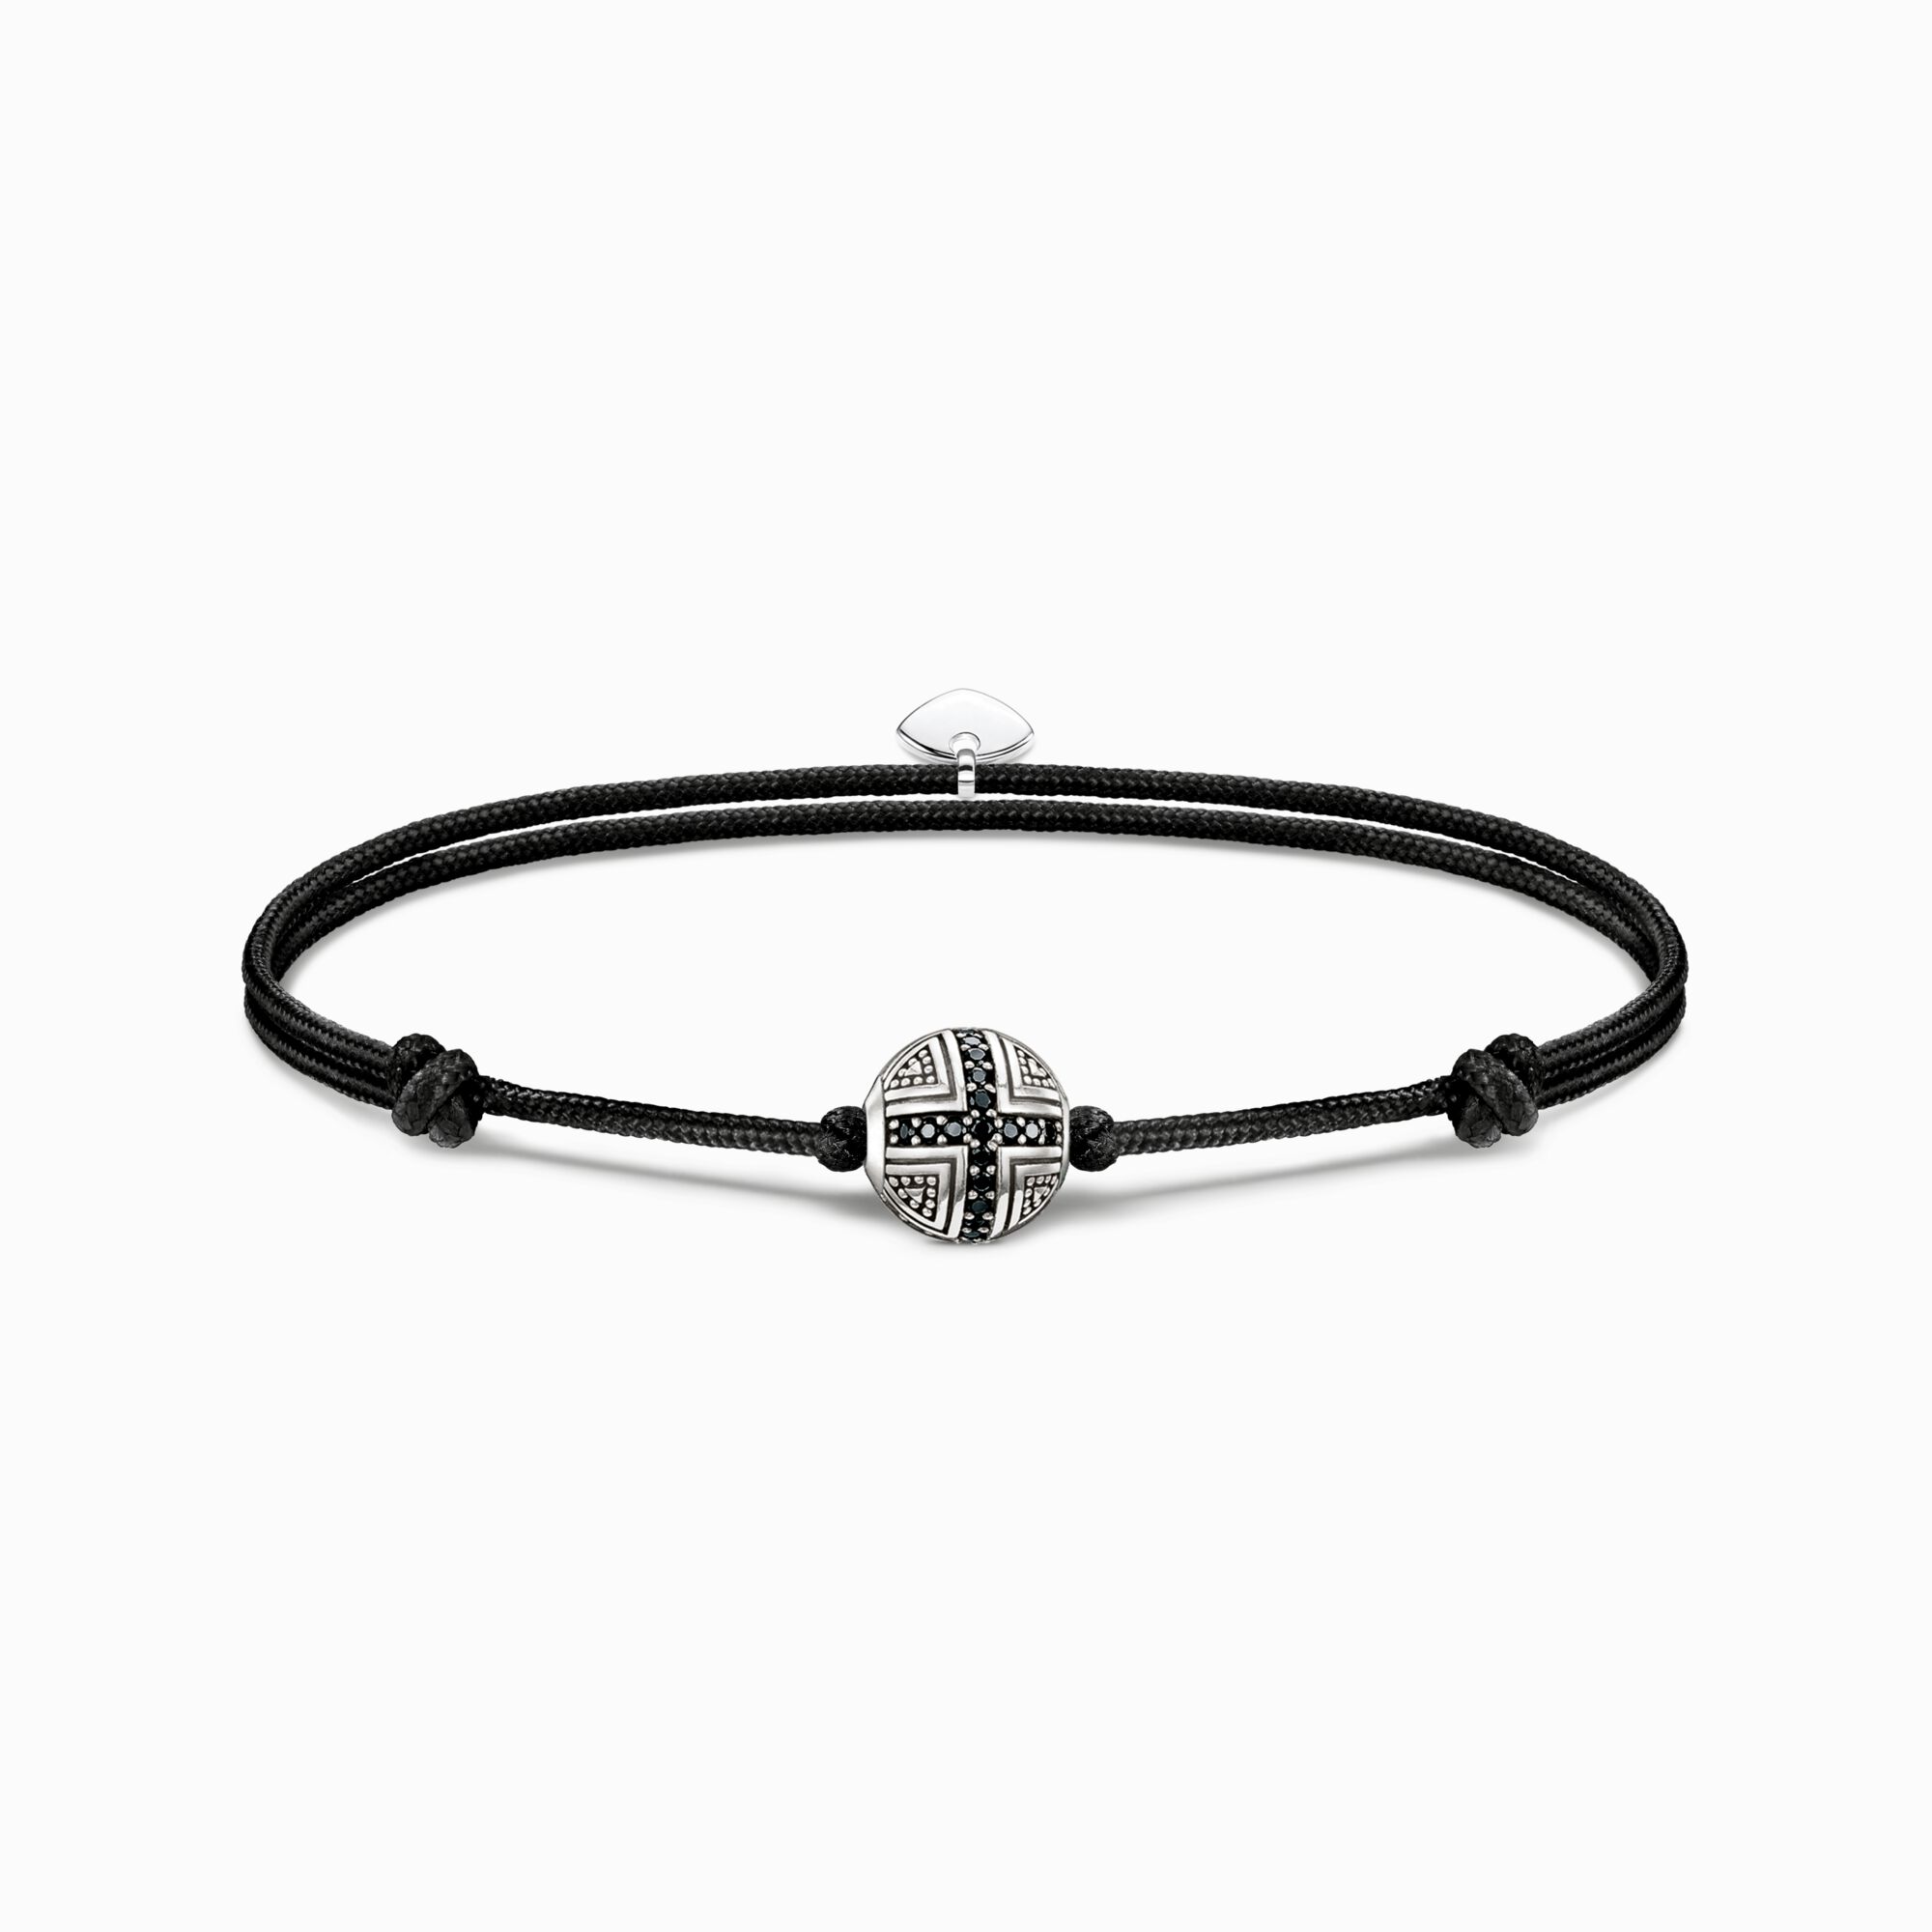 Bracelet Karma Secret with black cross Bead from the Karma Beads collection in the THOMAS SABO online store